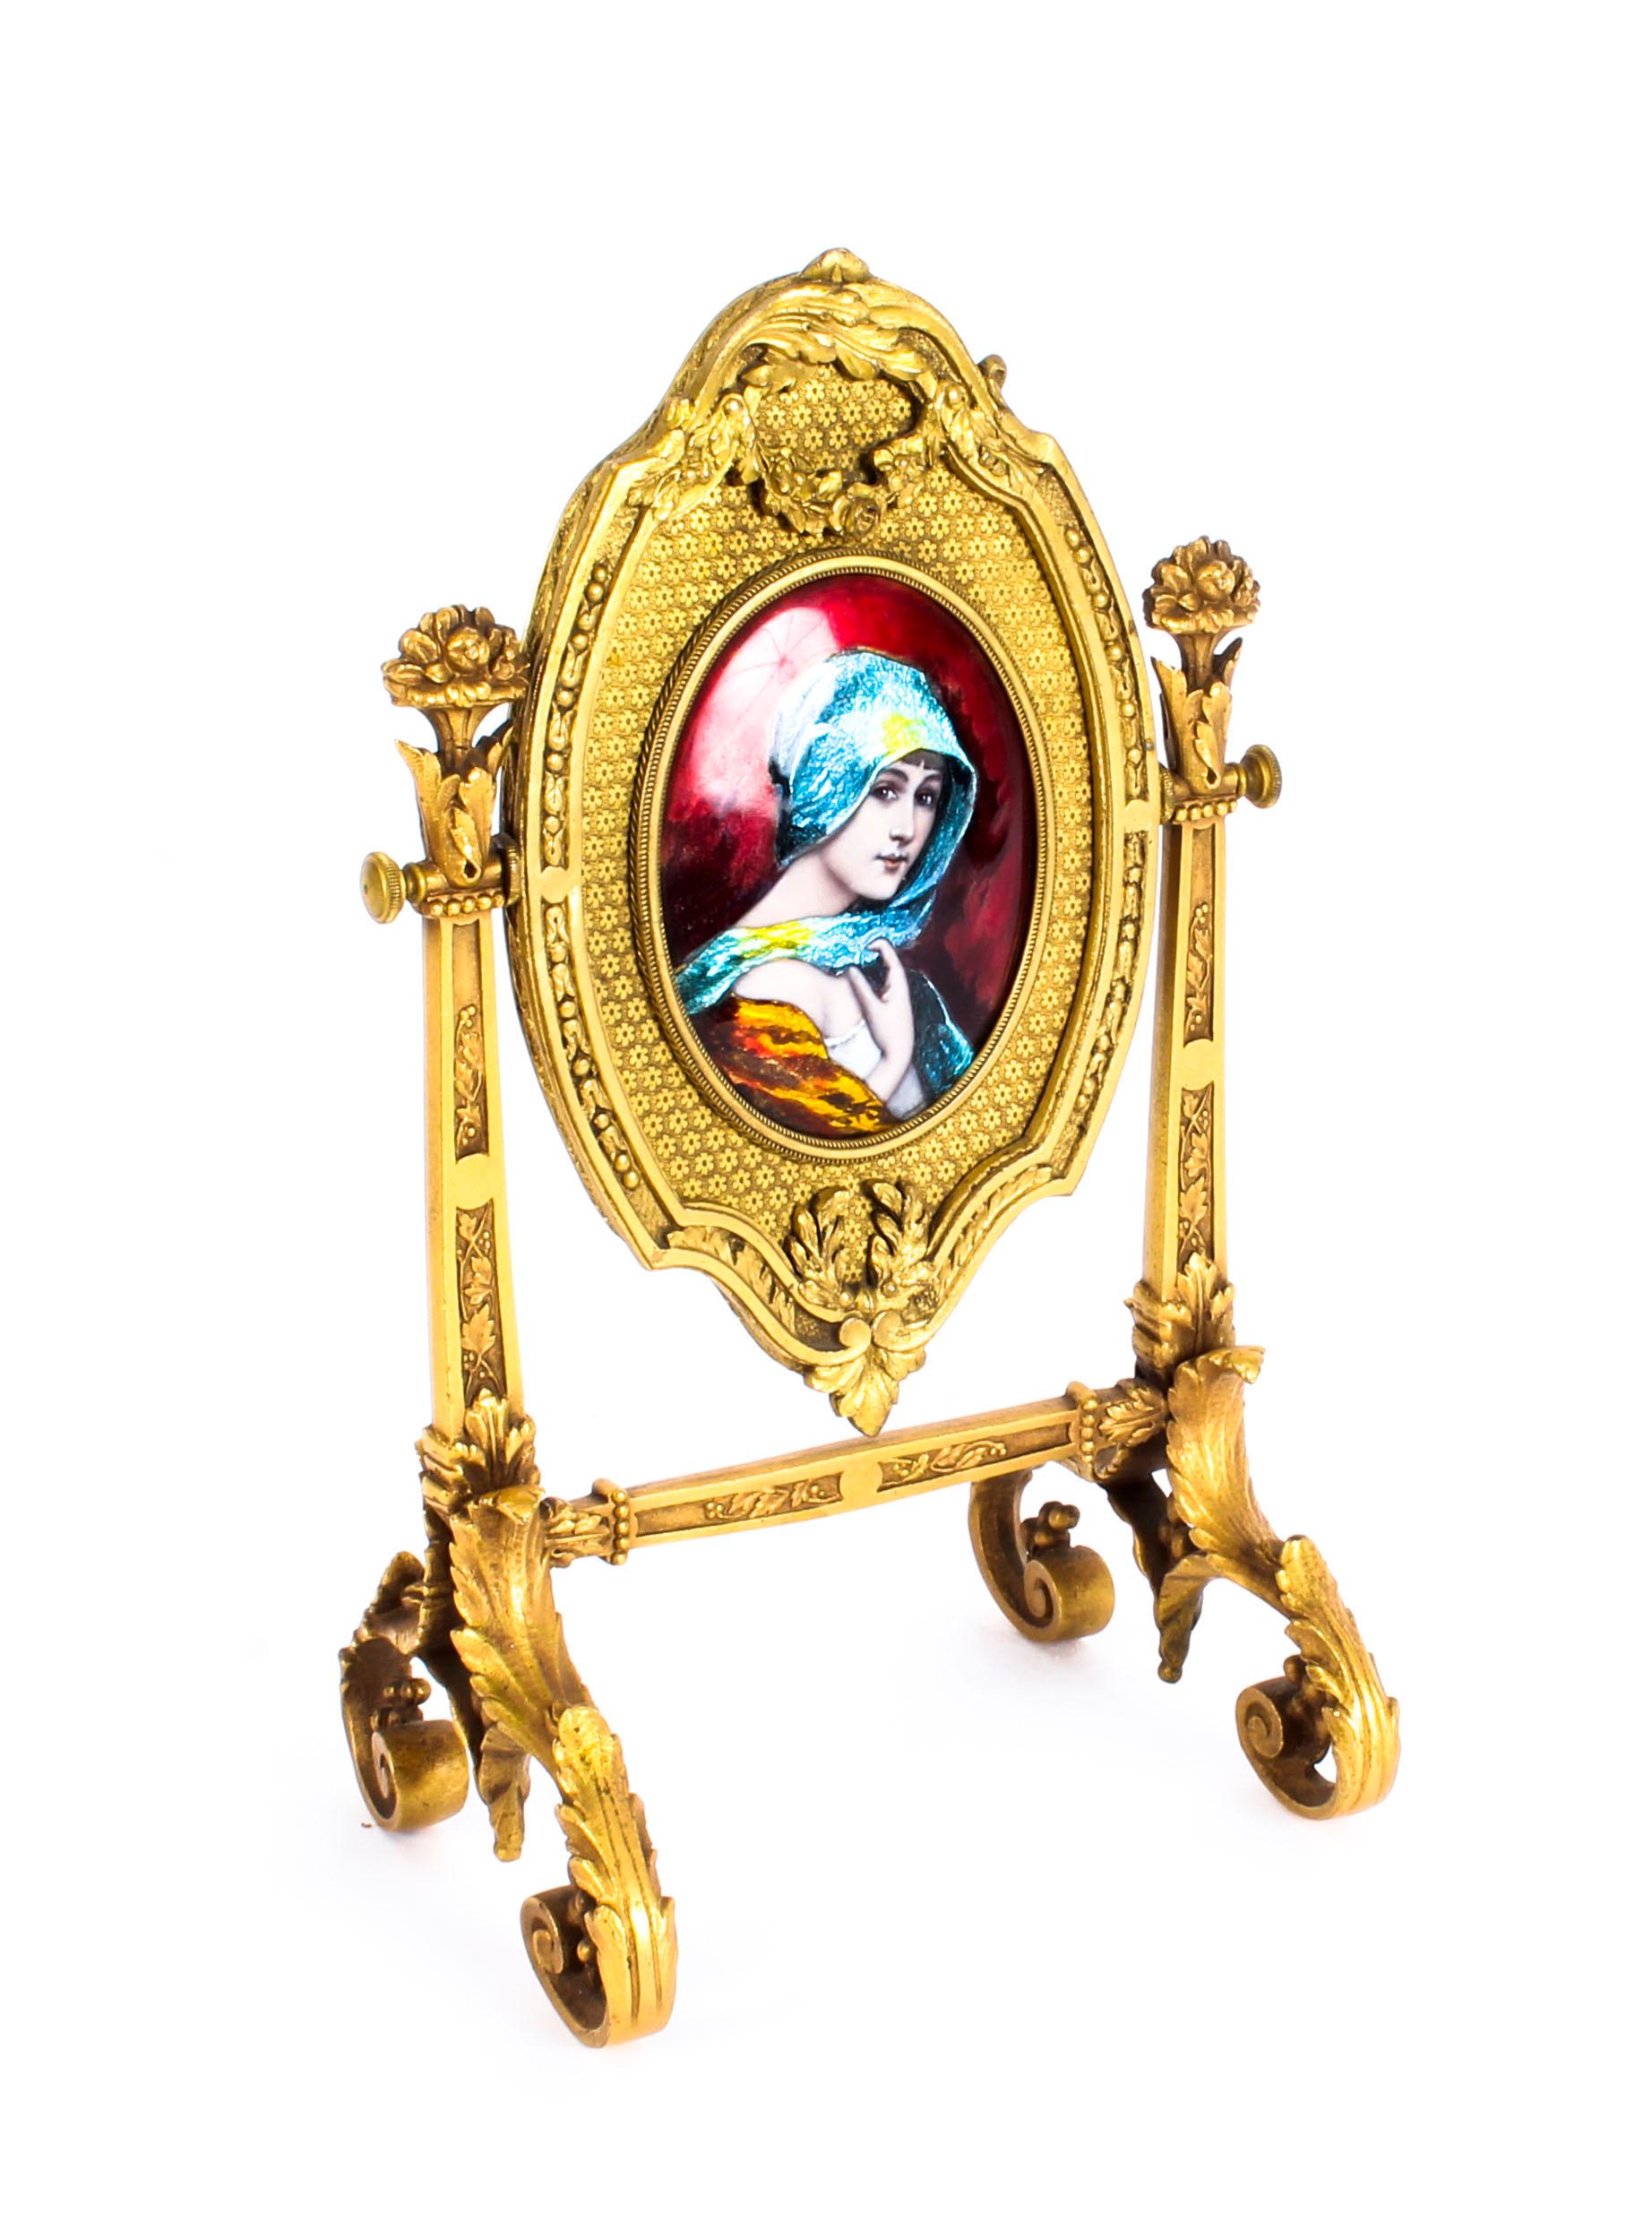 Antique French Ormolu and Limoges Enamel Table Mirror F.Bienvue, 19th Century For Sale 7